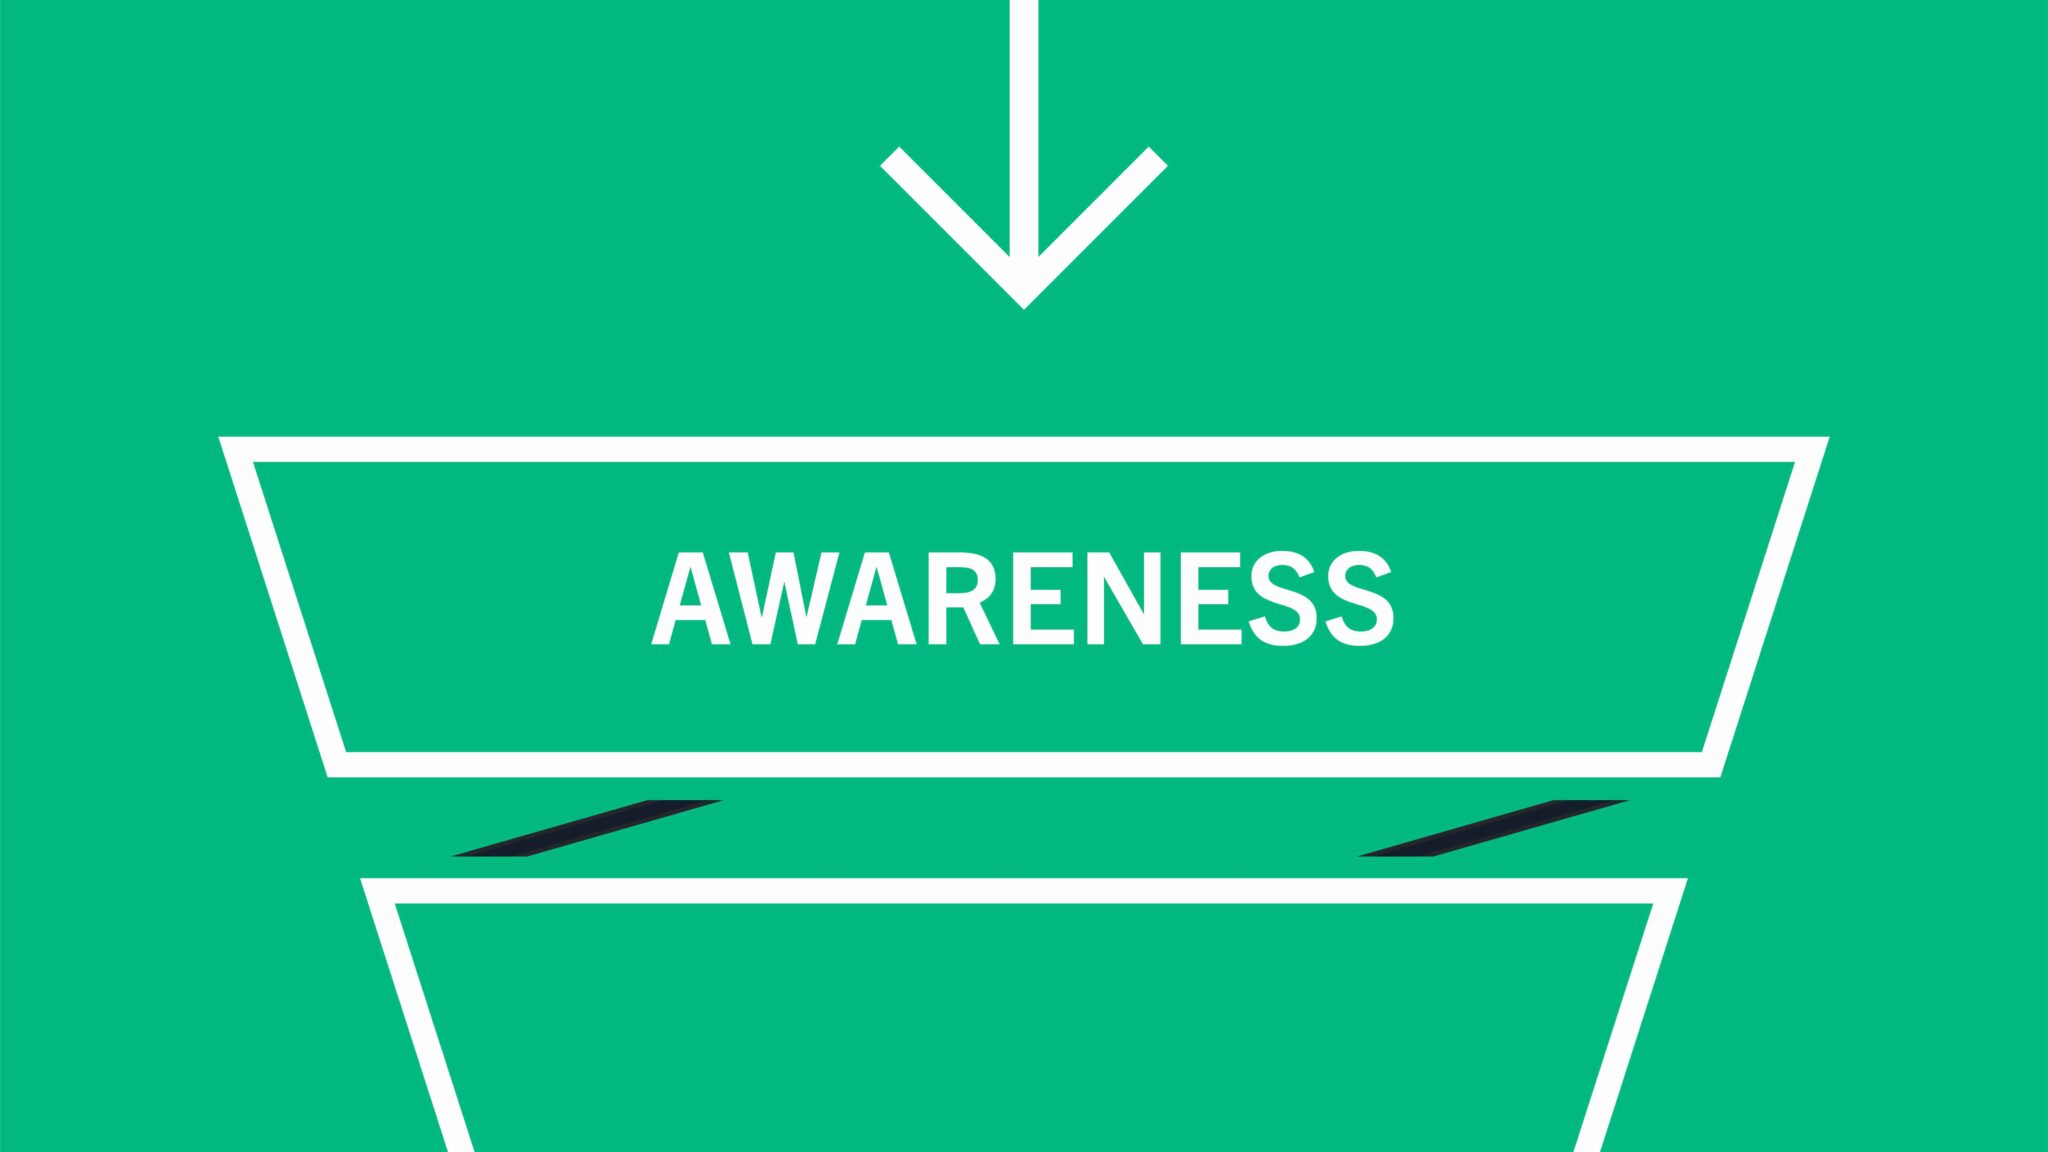 awareness stage of the marketing funnel